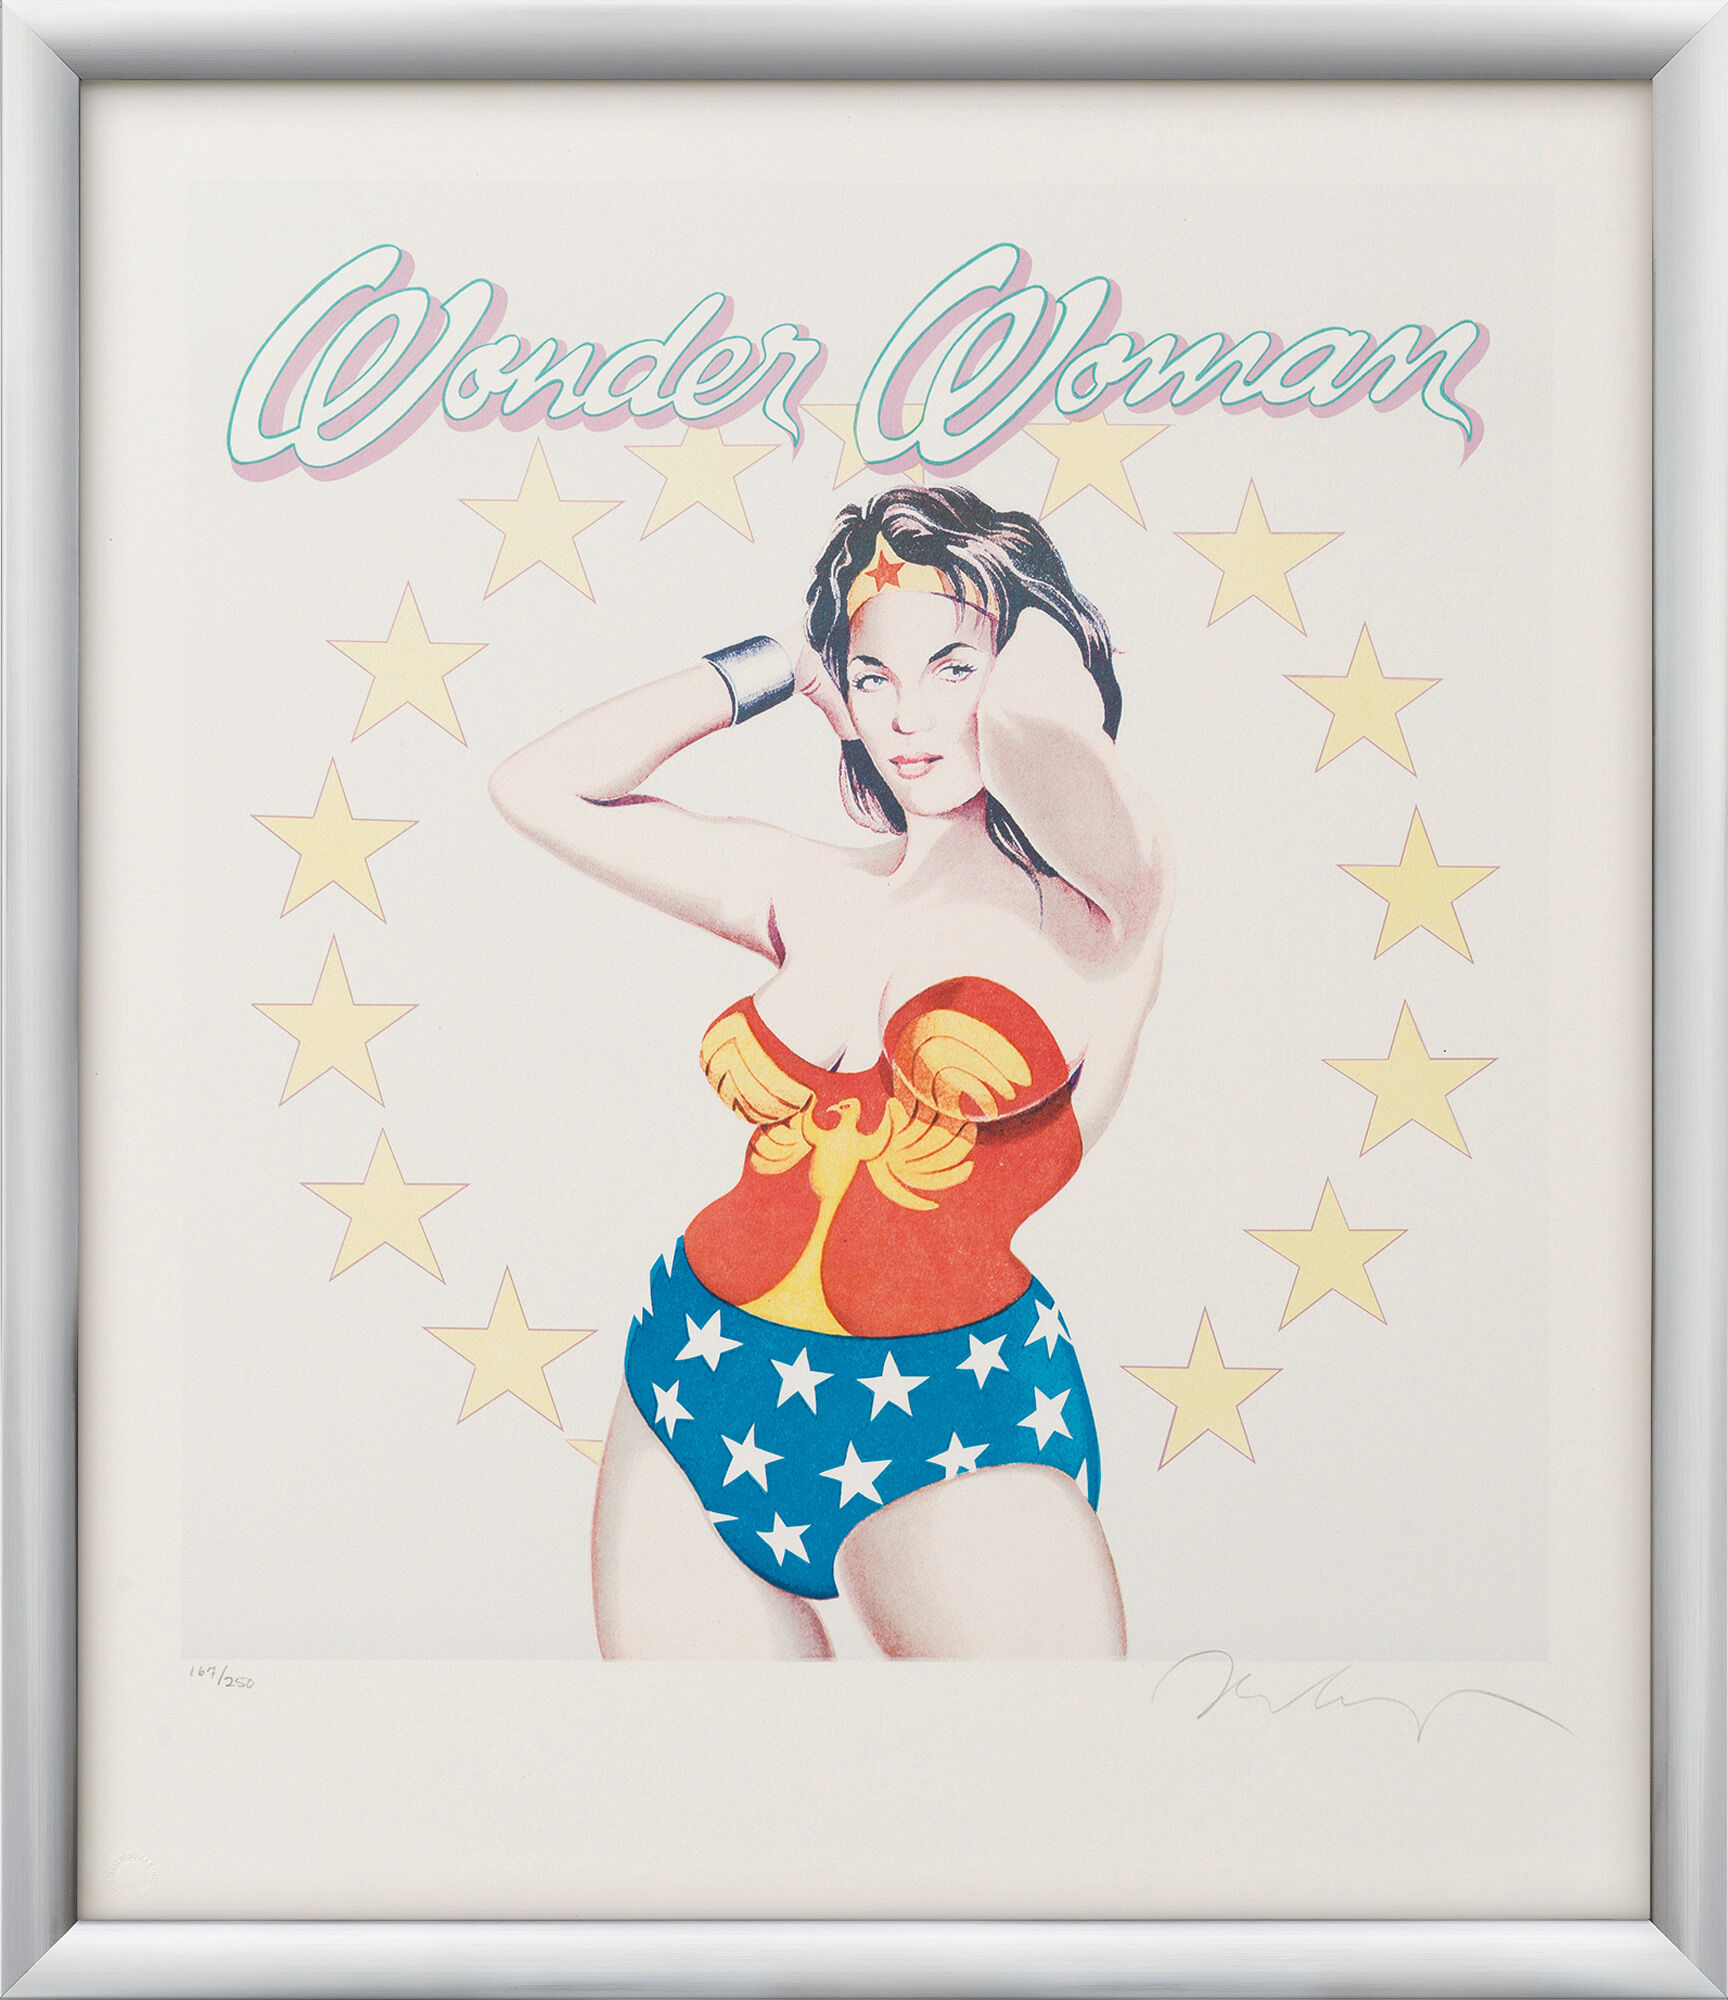 Picture "Wonder Woman" (1979) by Mel Ramos